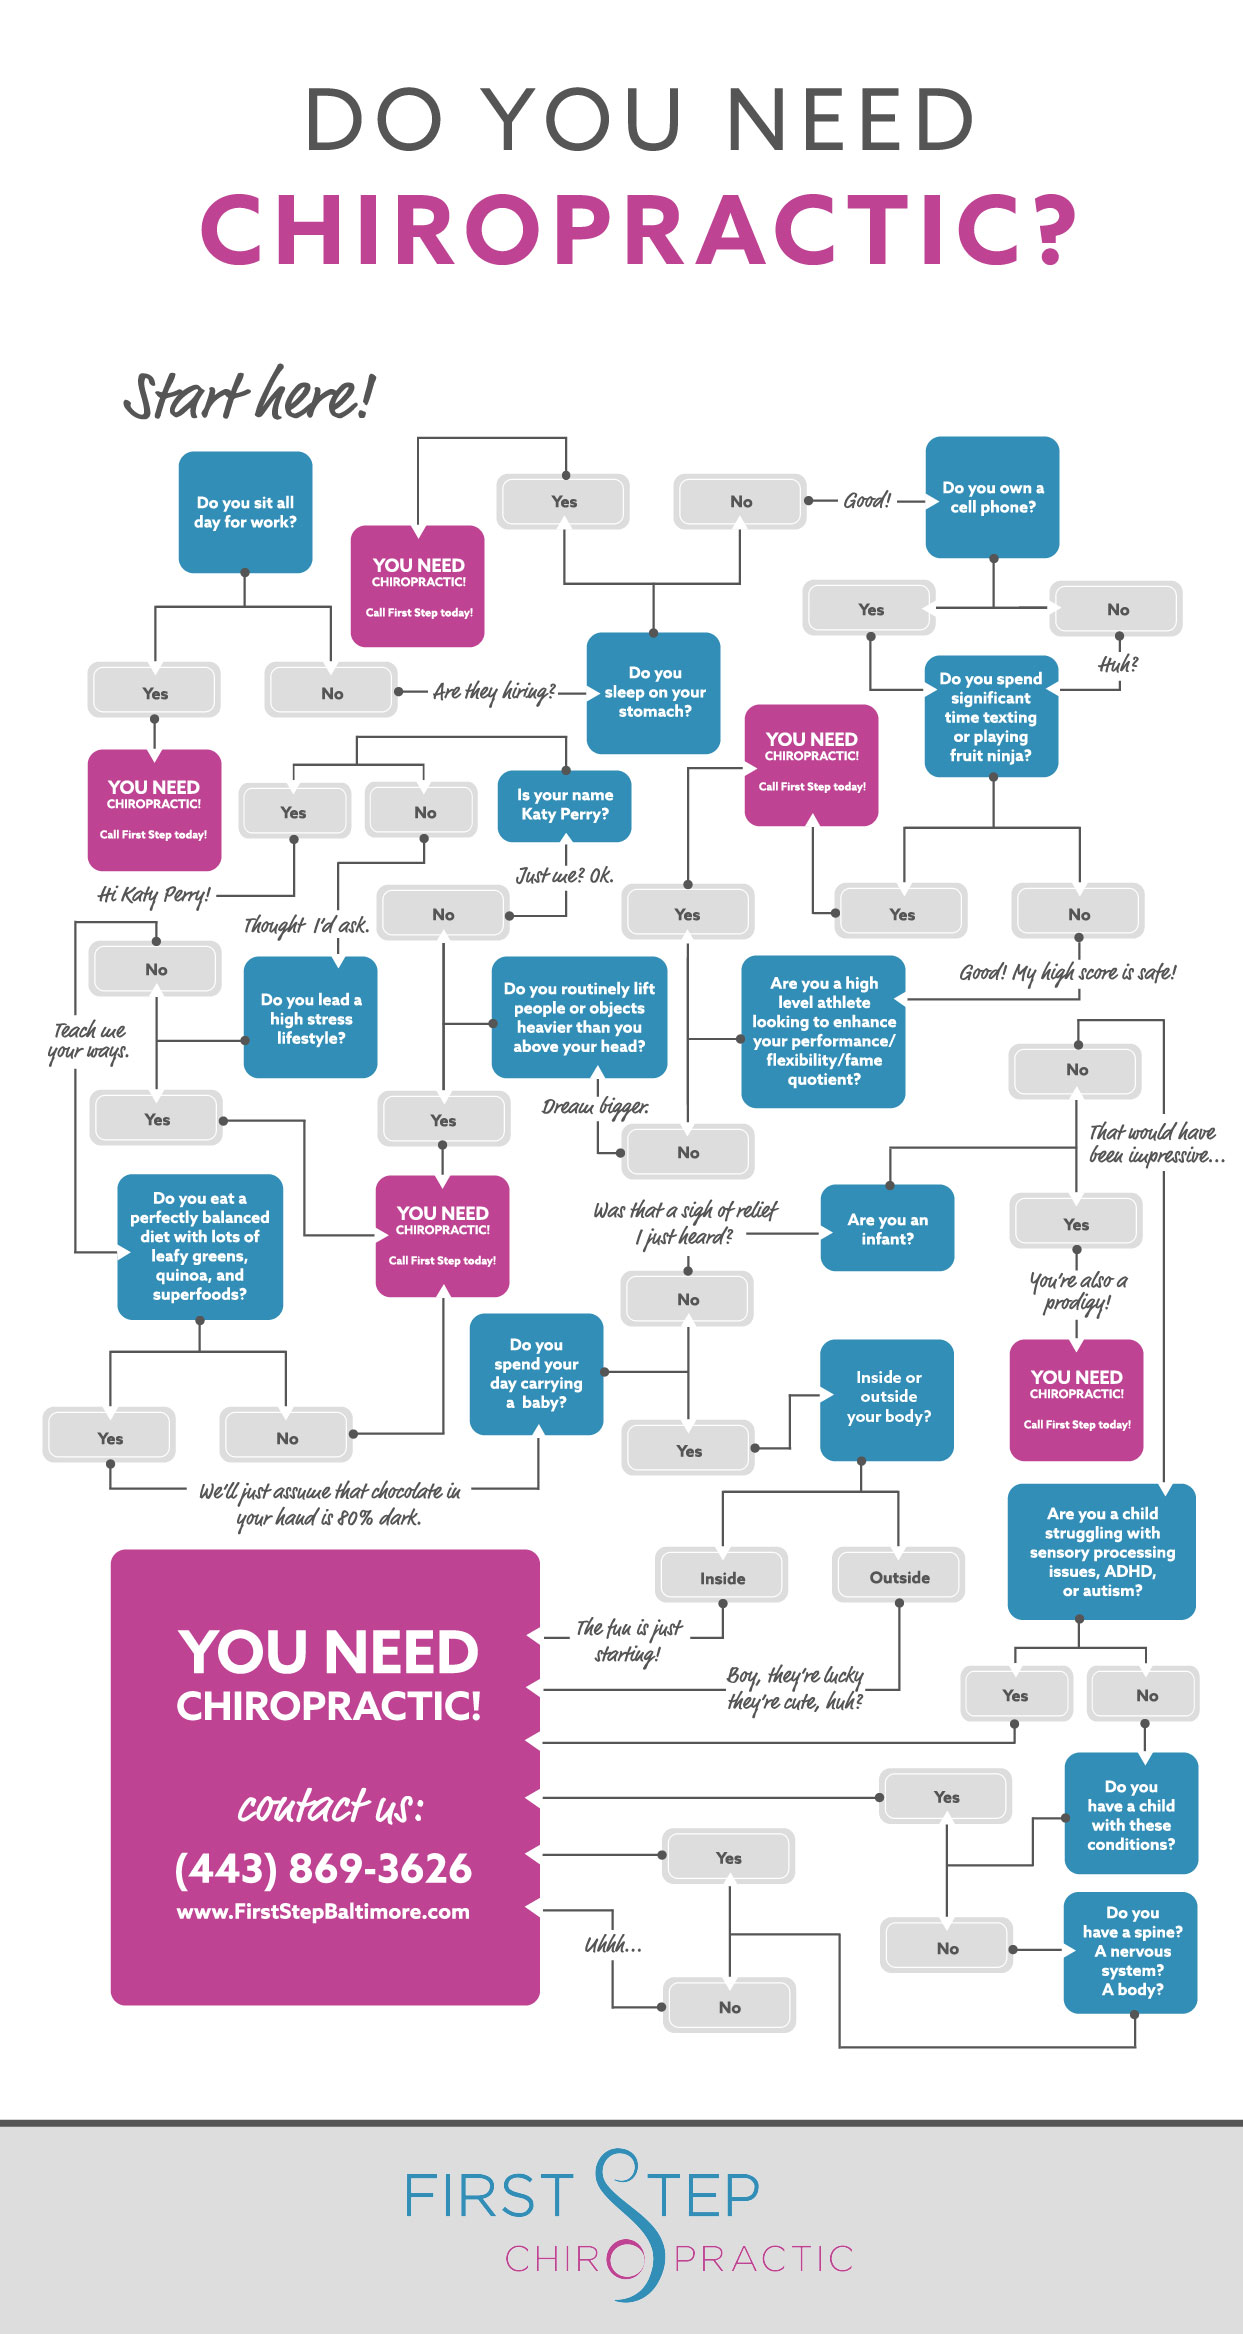 Do-You-Need-Chiropractic-Flow-Chart-Baltimore-First-Step